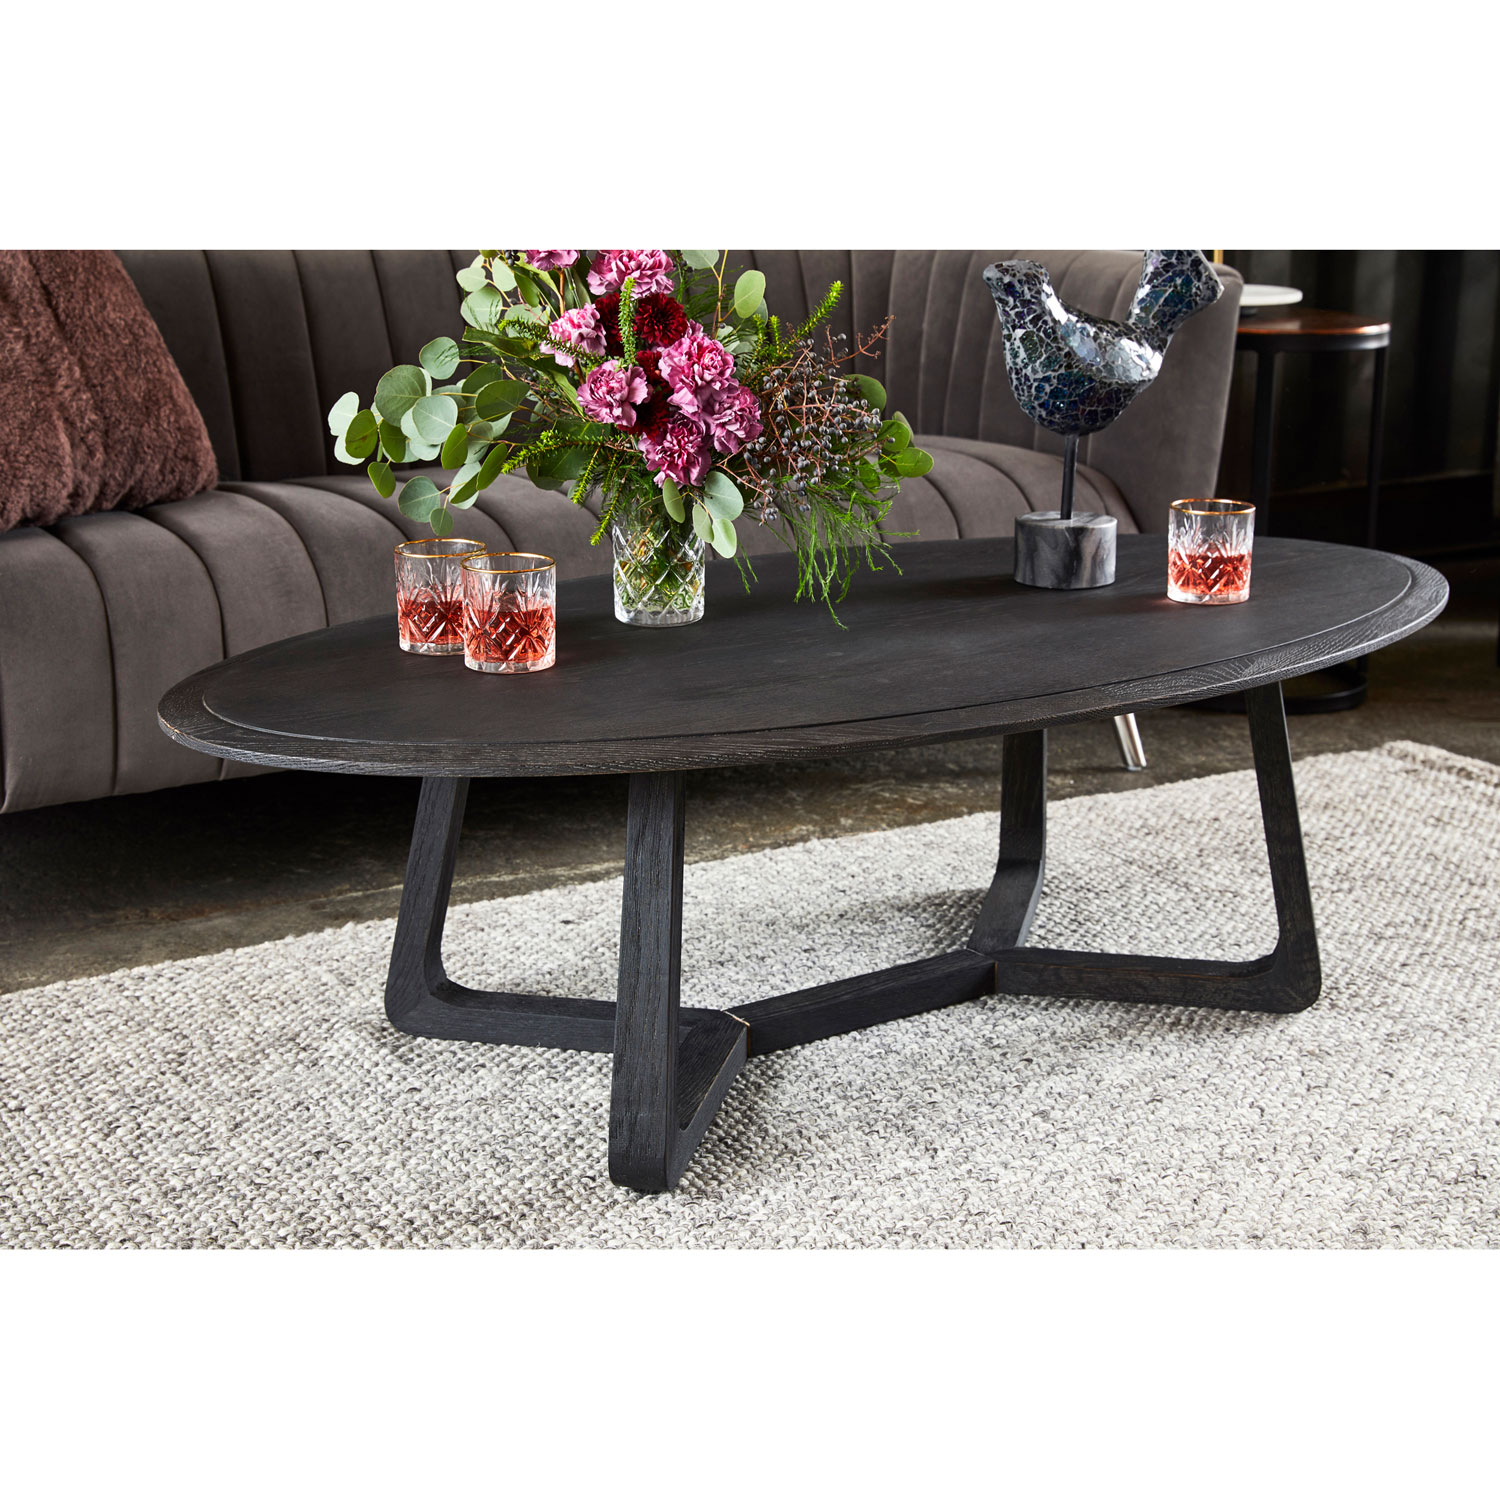 Nathan Contemporary Oval Coffee Table - Black